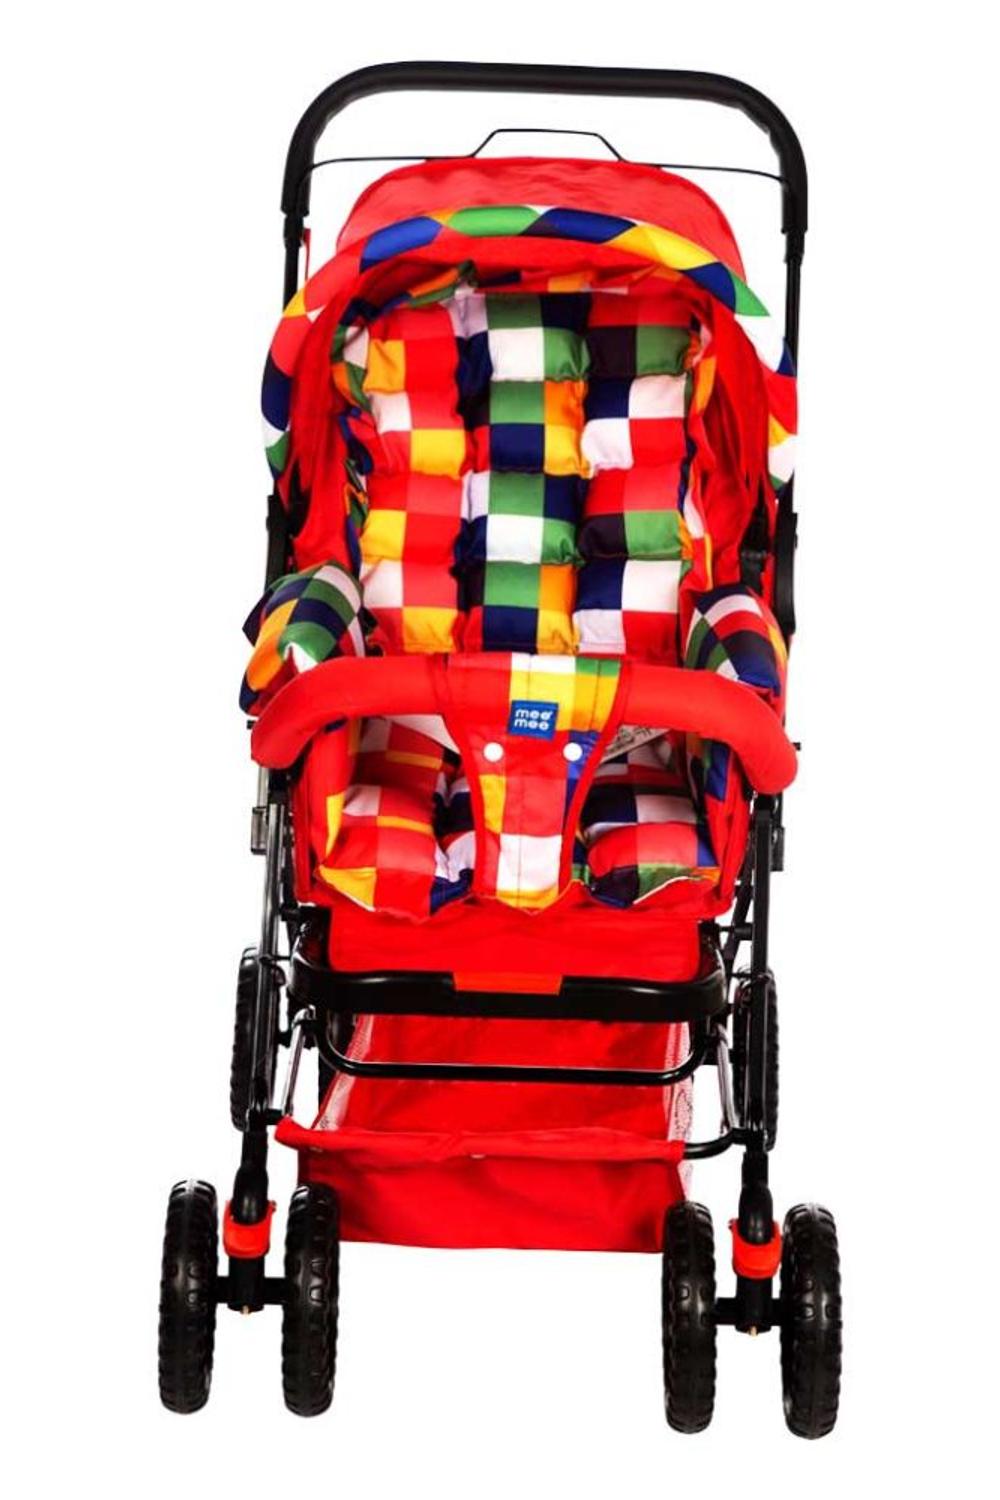 Mee Mee Baby Pram with Adjustable Seating Position